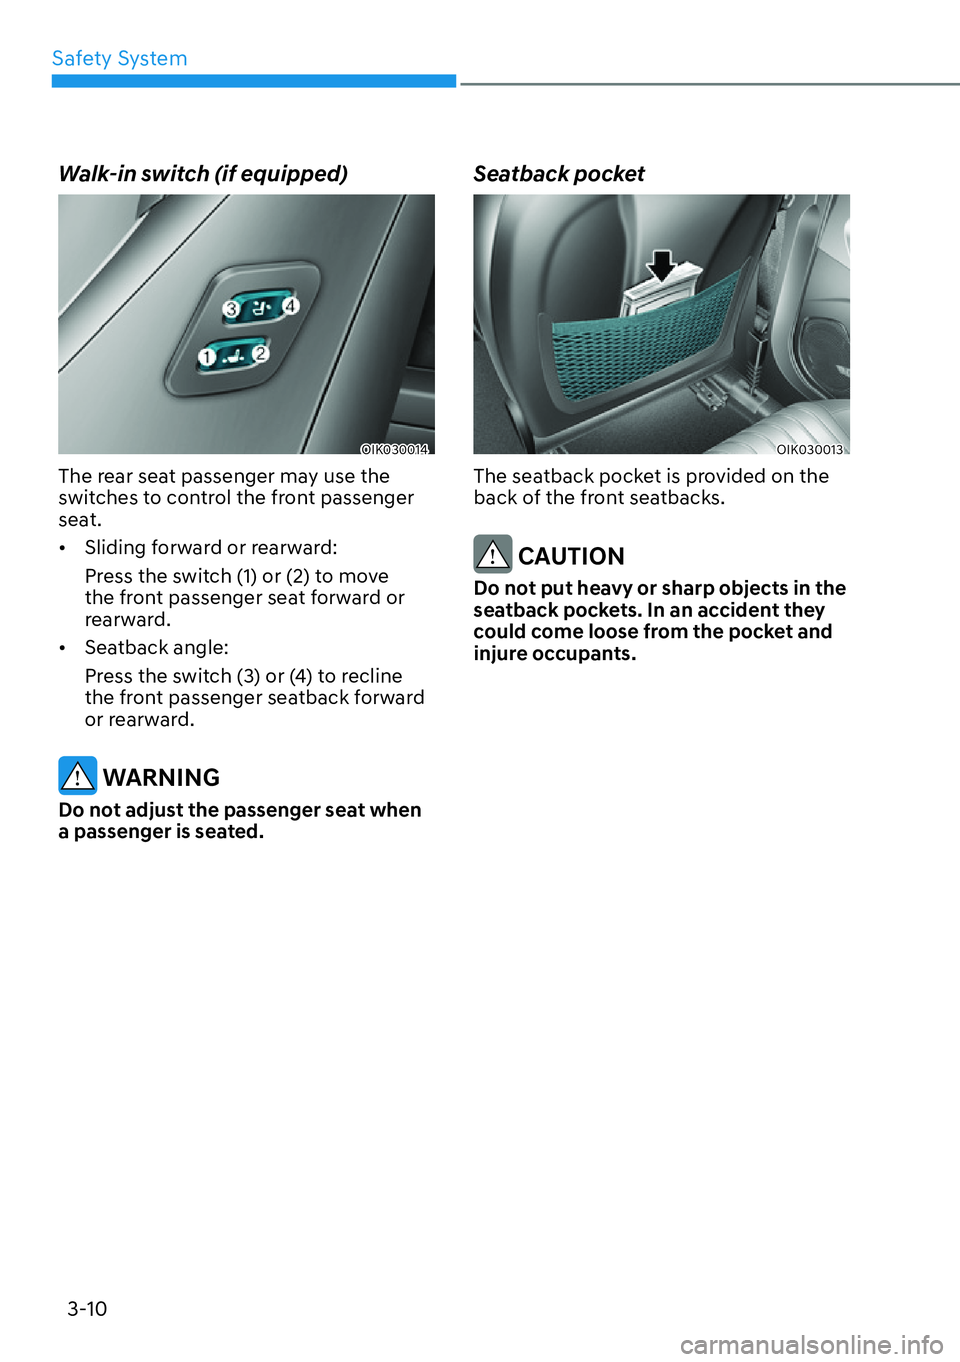 HYUNDAI GENESIS G70 2022 Service Manual Safety System
3-10
Walk-in switch (if equipped)
OIK030014
The rear seat passenger may use the 
switches to control the front passenger 
seat.
[�Sliding forward or rearward:
Press the switch (1) or (